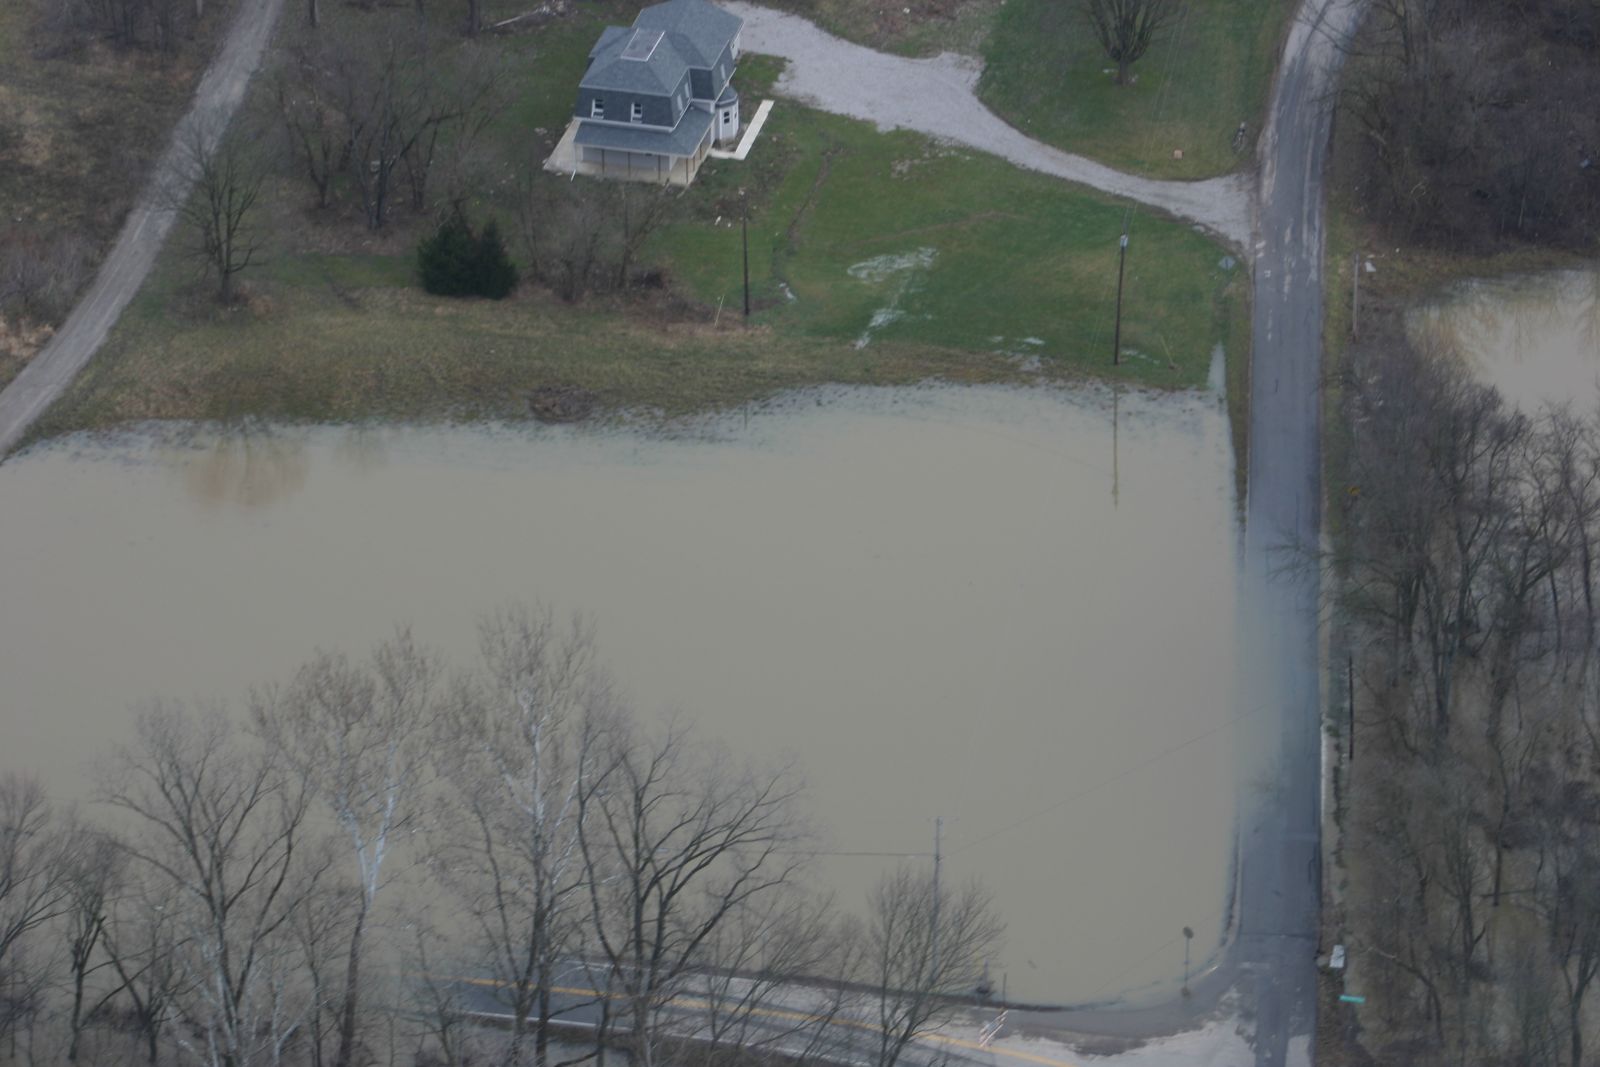 Marion County Flooding